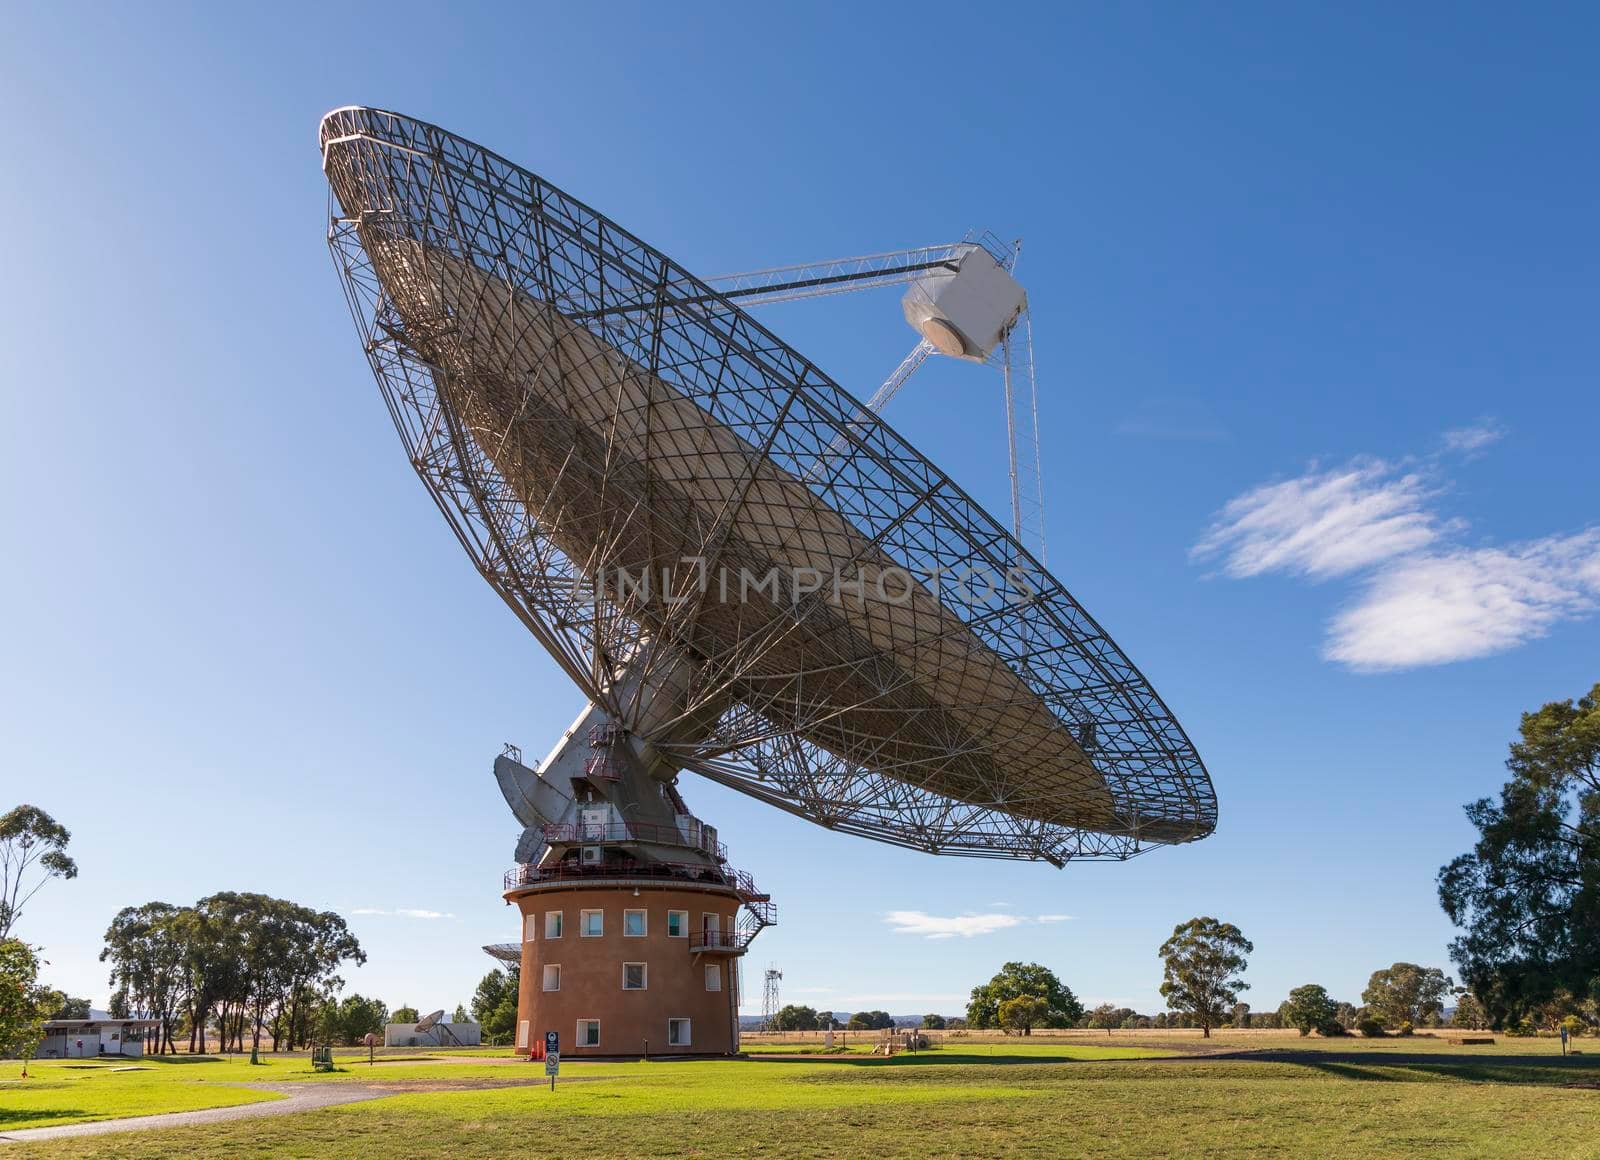 A large outdoor scientific radio telescope by WittkePhotos